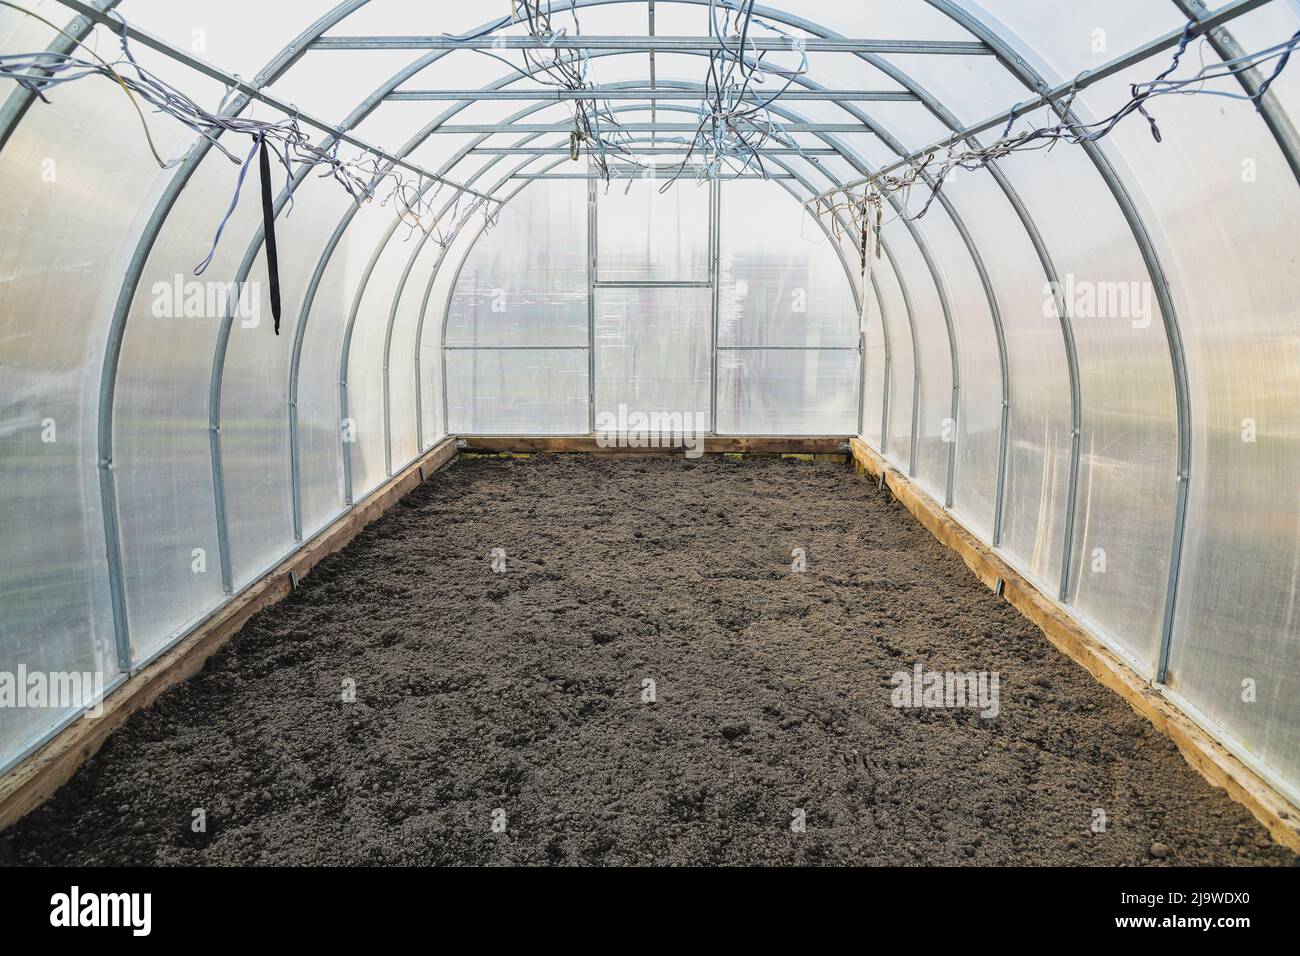 The empty greenhouse before planting. Plowed earth Stock Photo